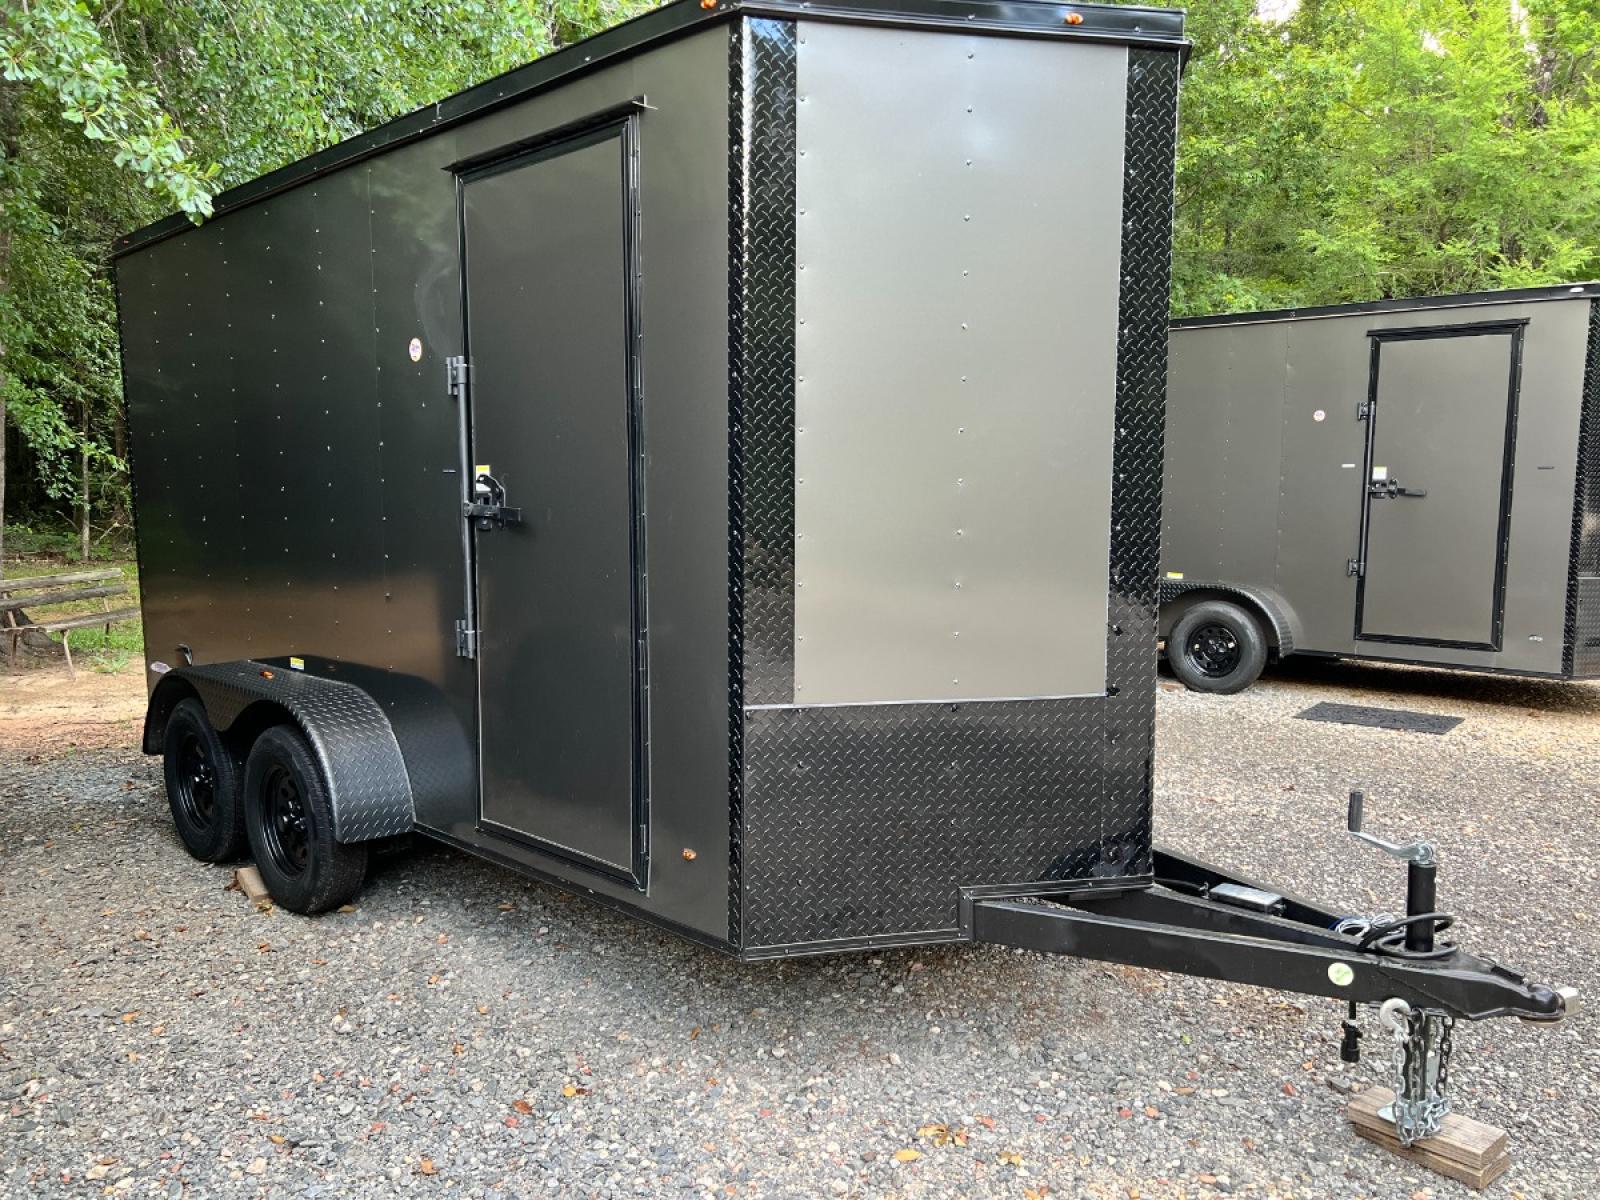 2023 Charcoal Metallic w/Black Out Pkg. Freedom Trailers 6ft X 14ft Tandem , located at 1330 Rainey Rd., Macon, 31220, (478) 960-1044, 32.845638, -83.778687 - Brand New 2023 "Top of the Line" Freedom Brand Trailer Made in South Ga. Compact Size, Great for Tools or Cycle's! Awesome 6ft X 14ft Tandem Enclosed Cycle Hauler & Cargo Trailer! Taller Inside Height is 7ft 2" Tall Inside & the Ramp Door Clearance is 6ft 8" at the Back! .080 Thick Metallic - Photo #0